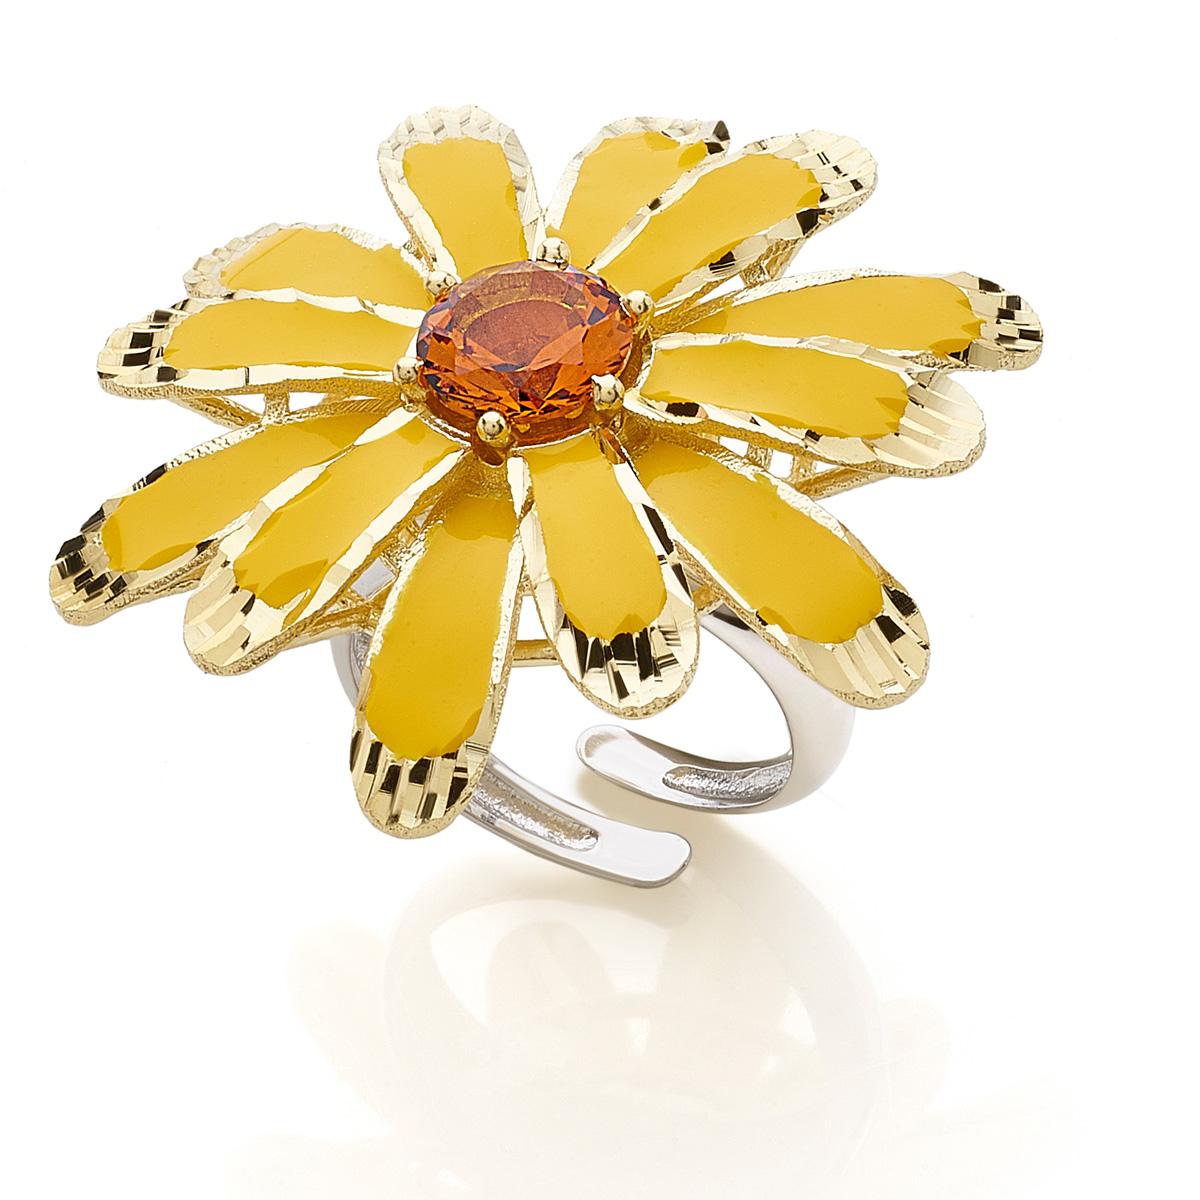 Large daisy ring in 925 gilded or rhodium-plated silver, enamel and cubic zirconia - ZAN439